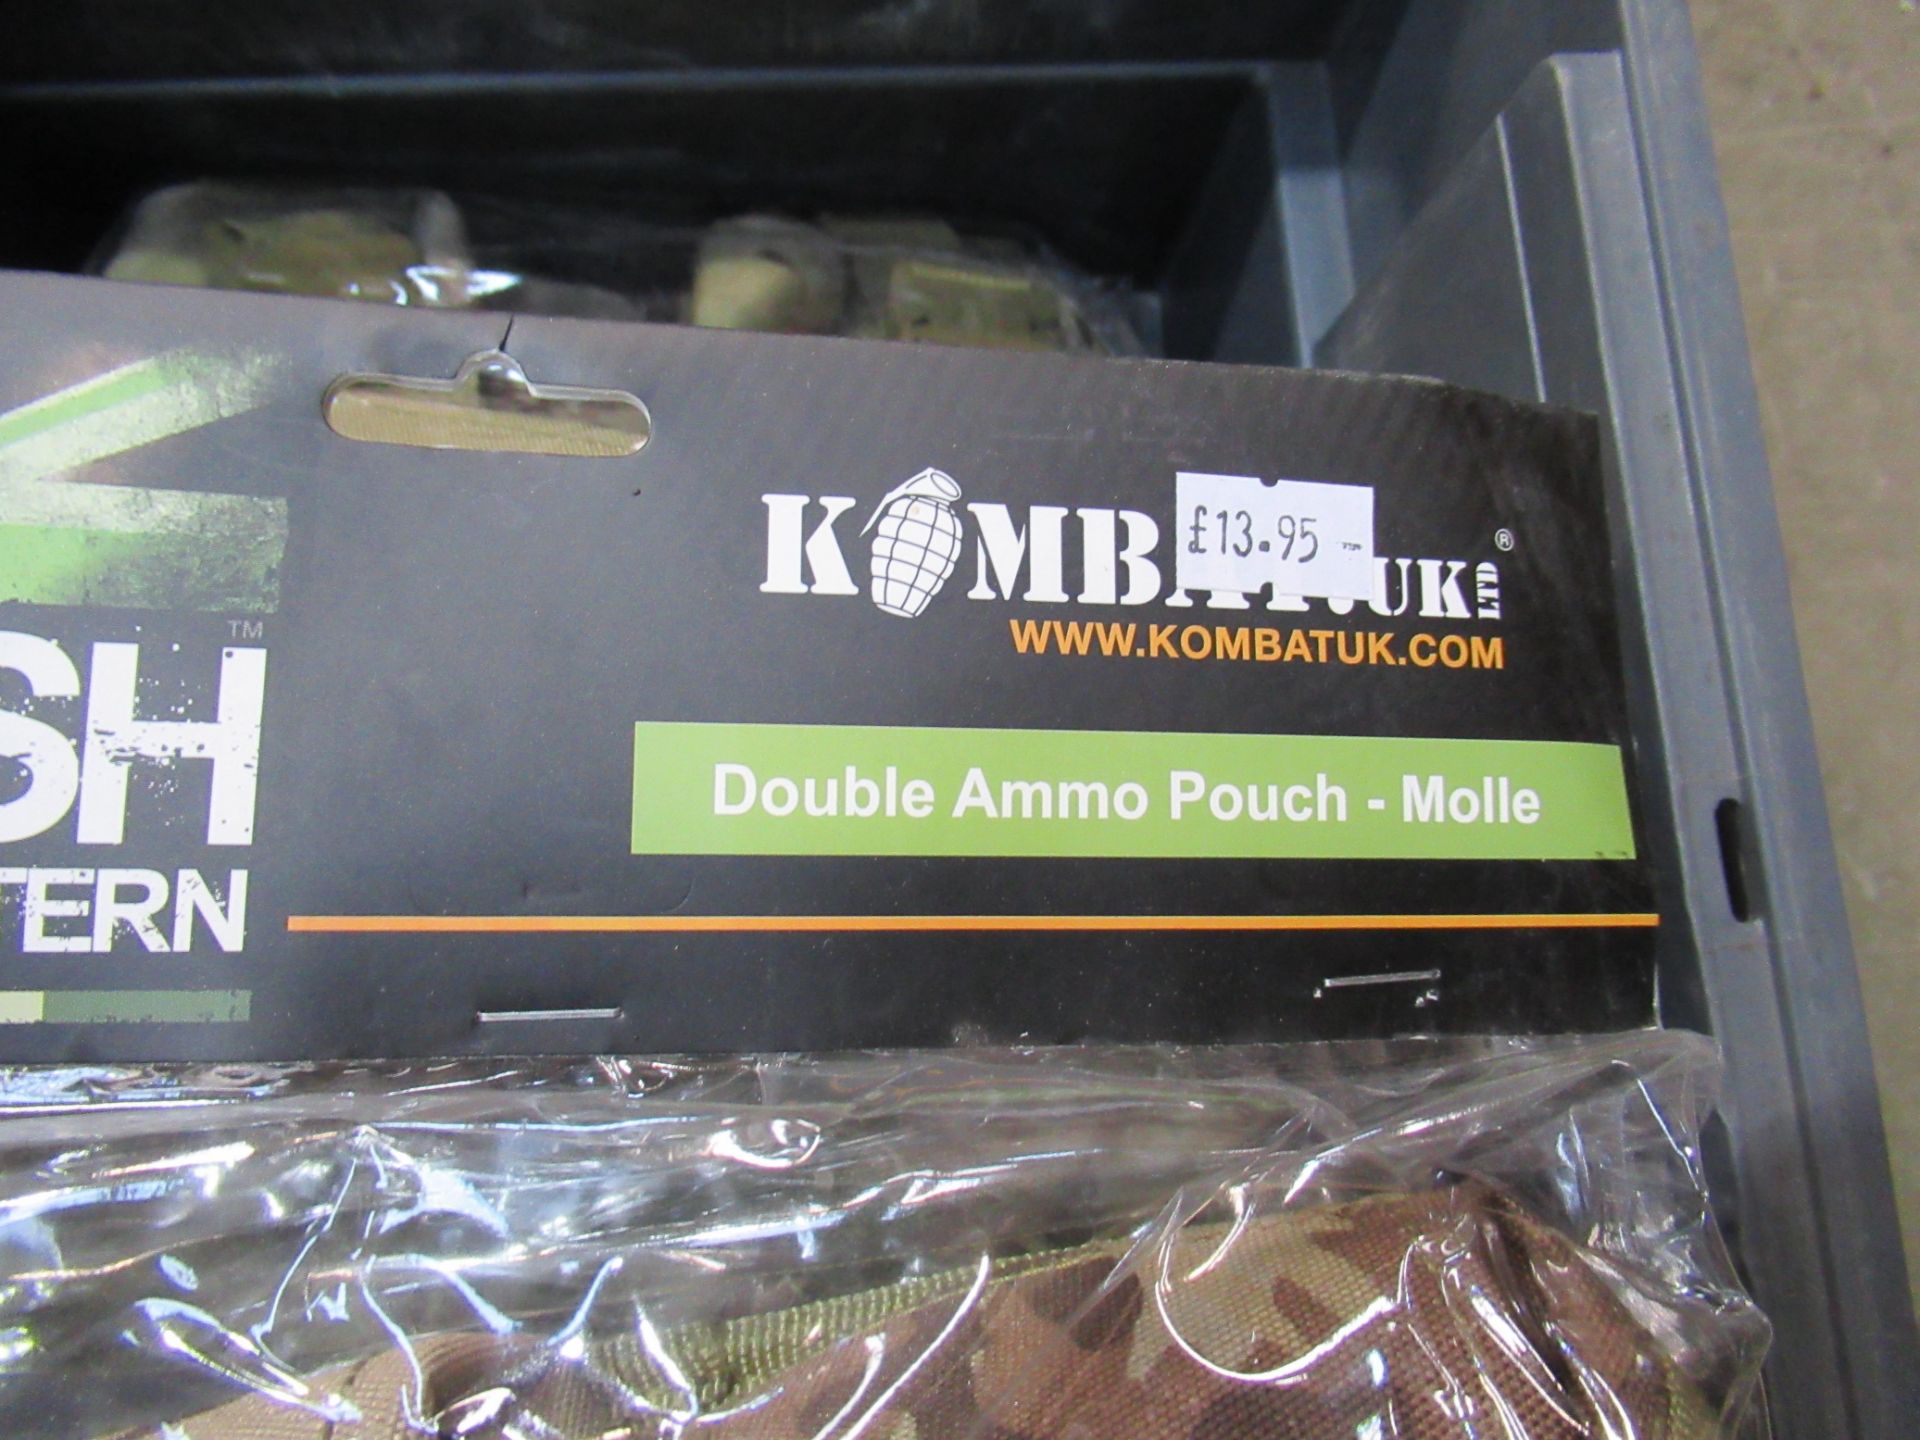 7x Kombat double ammo pouches (RRP £13.95 each) - Image 2 of 2